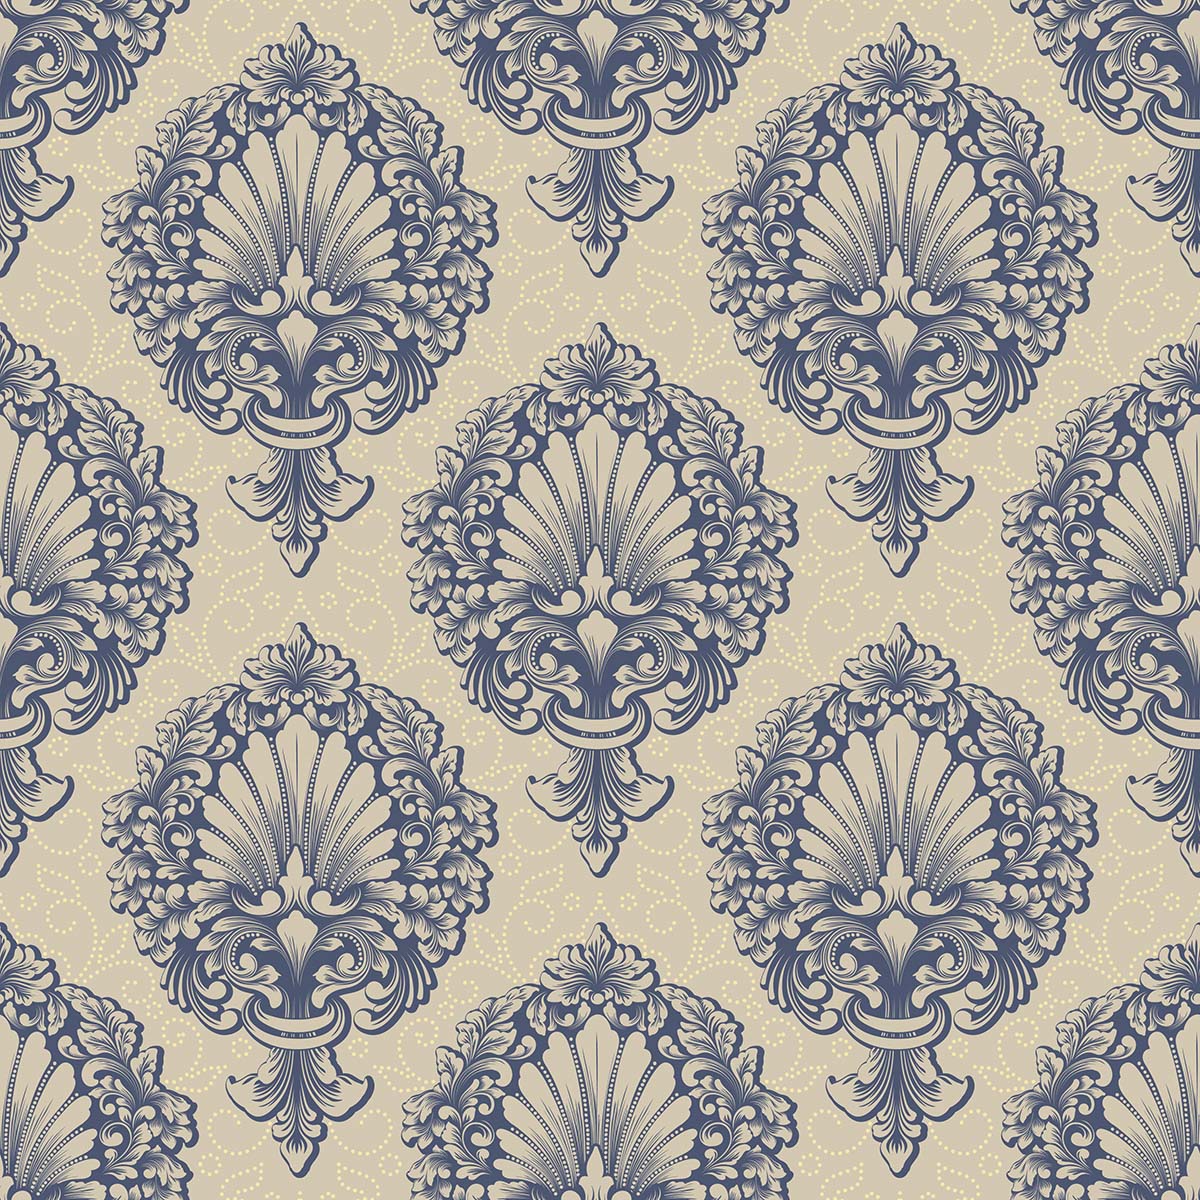 A pattern of blue and white flowers